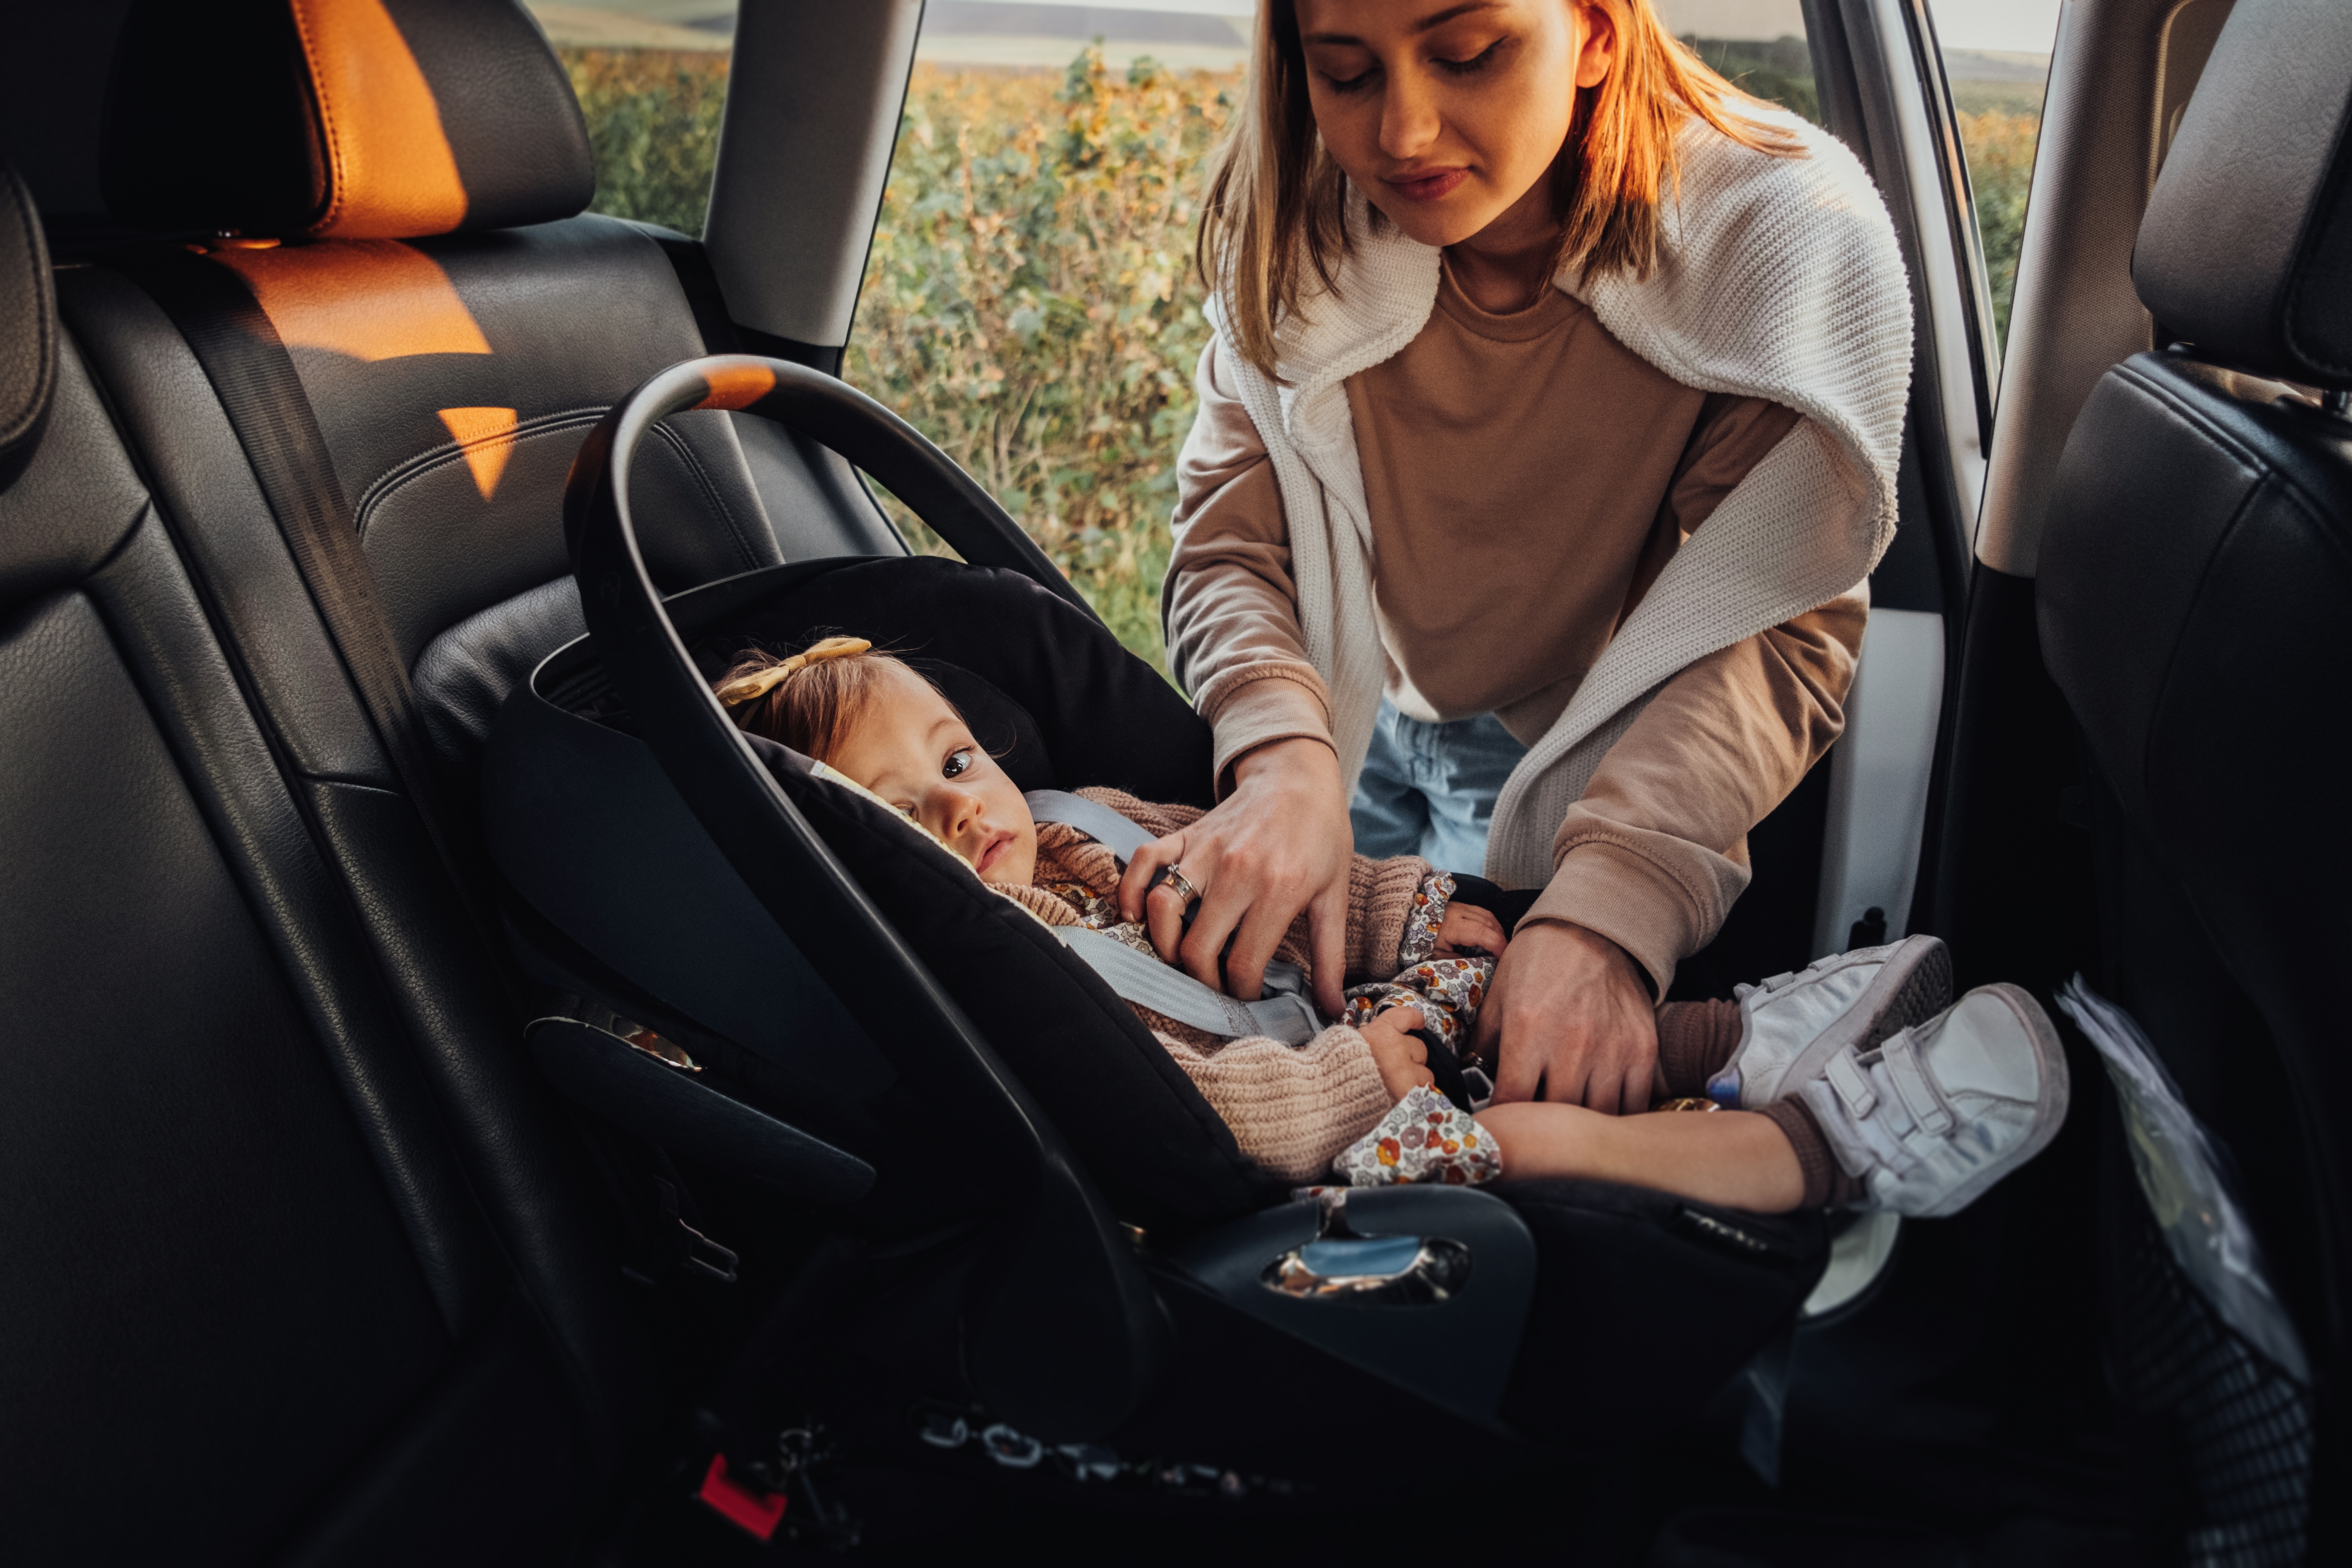 A young mother putting her baby girl in a car seat | Source: Shutterstock